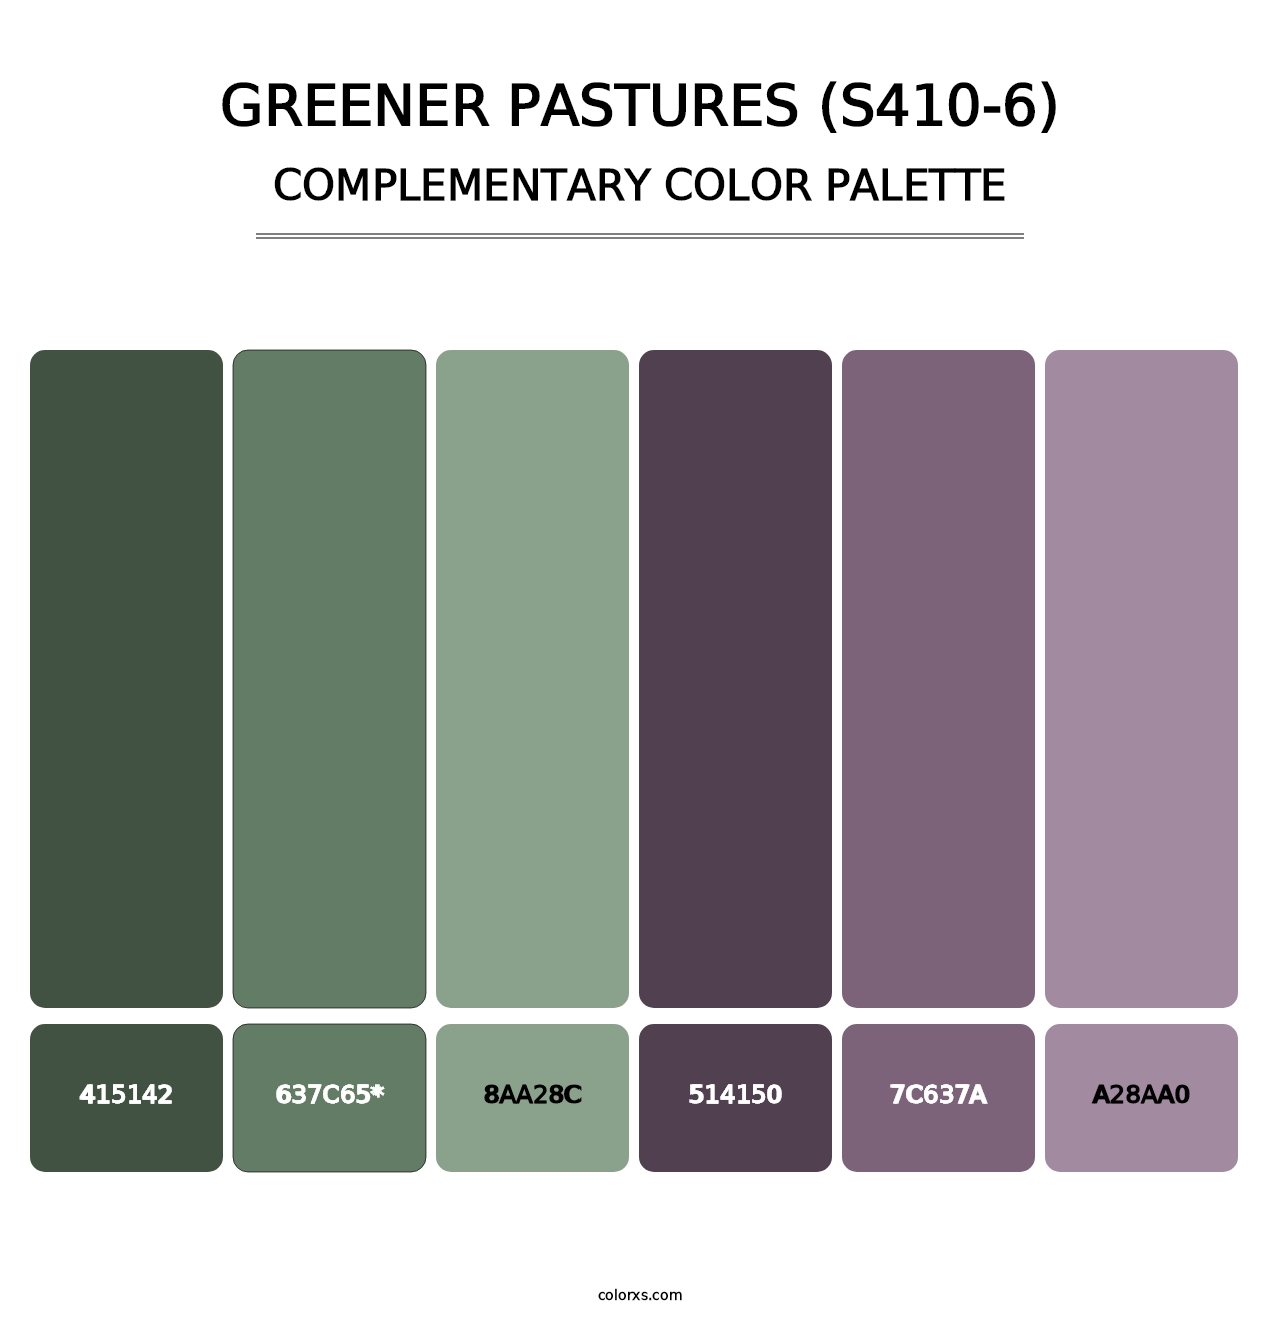 Greener Pastures (S410-6) - Complementary Color Palette